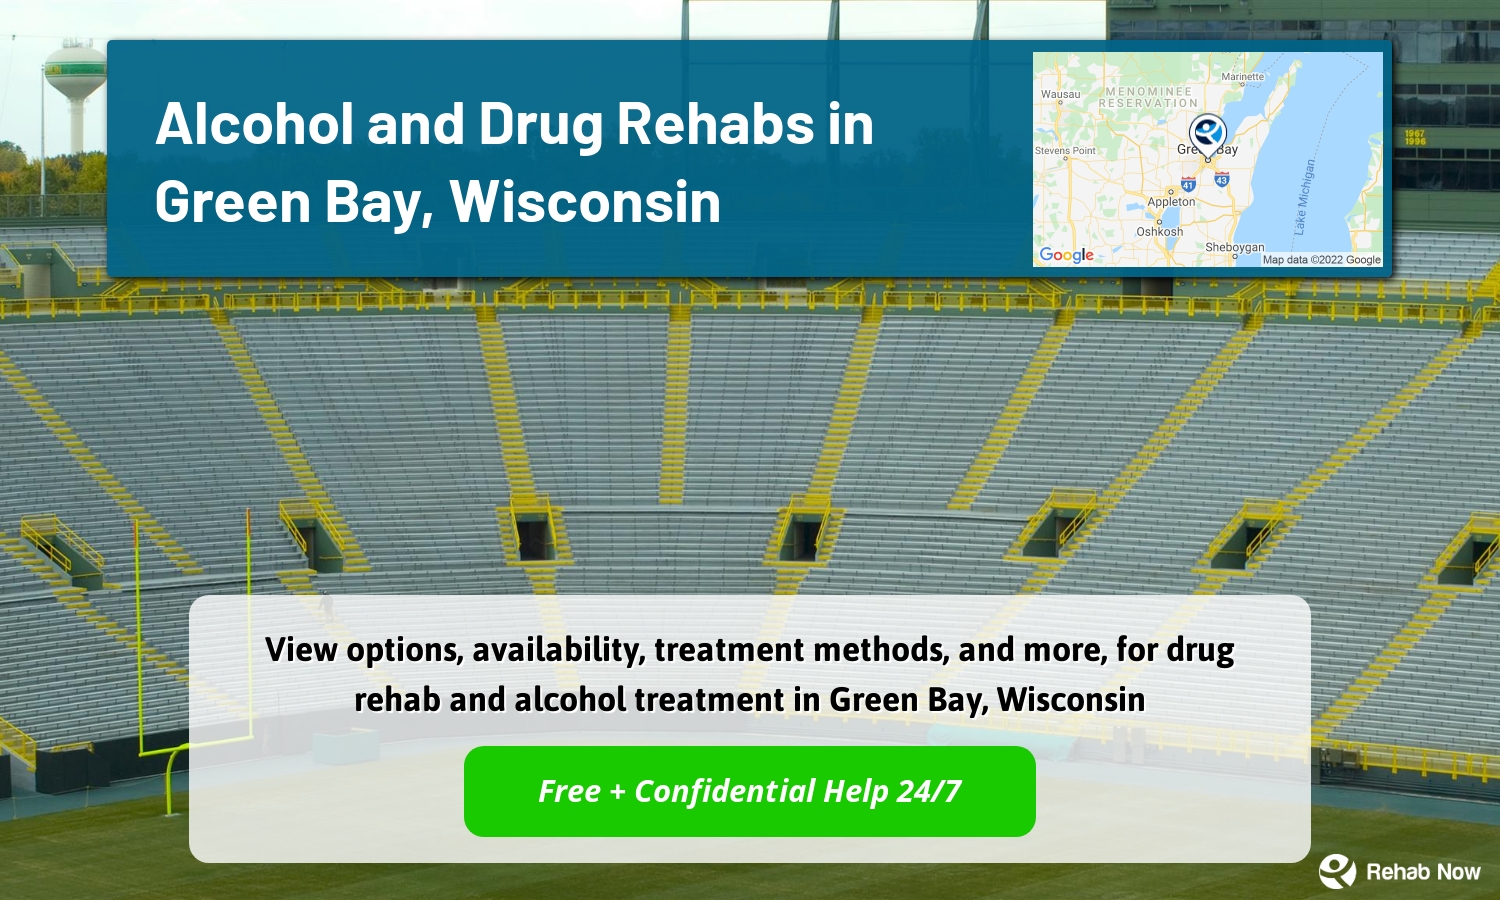 View options, availability, treatment methods, and more, for drug rehab and alcohol treatment in Green Bay, Wisconsin